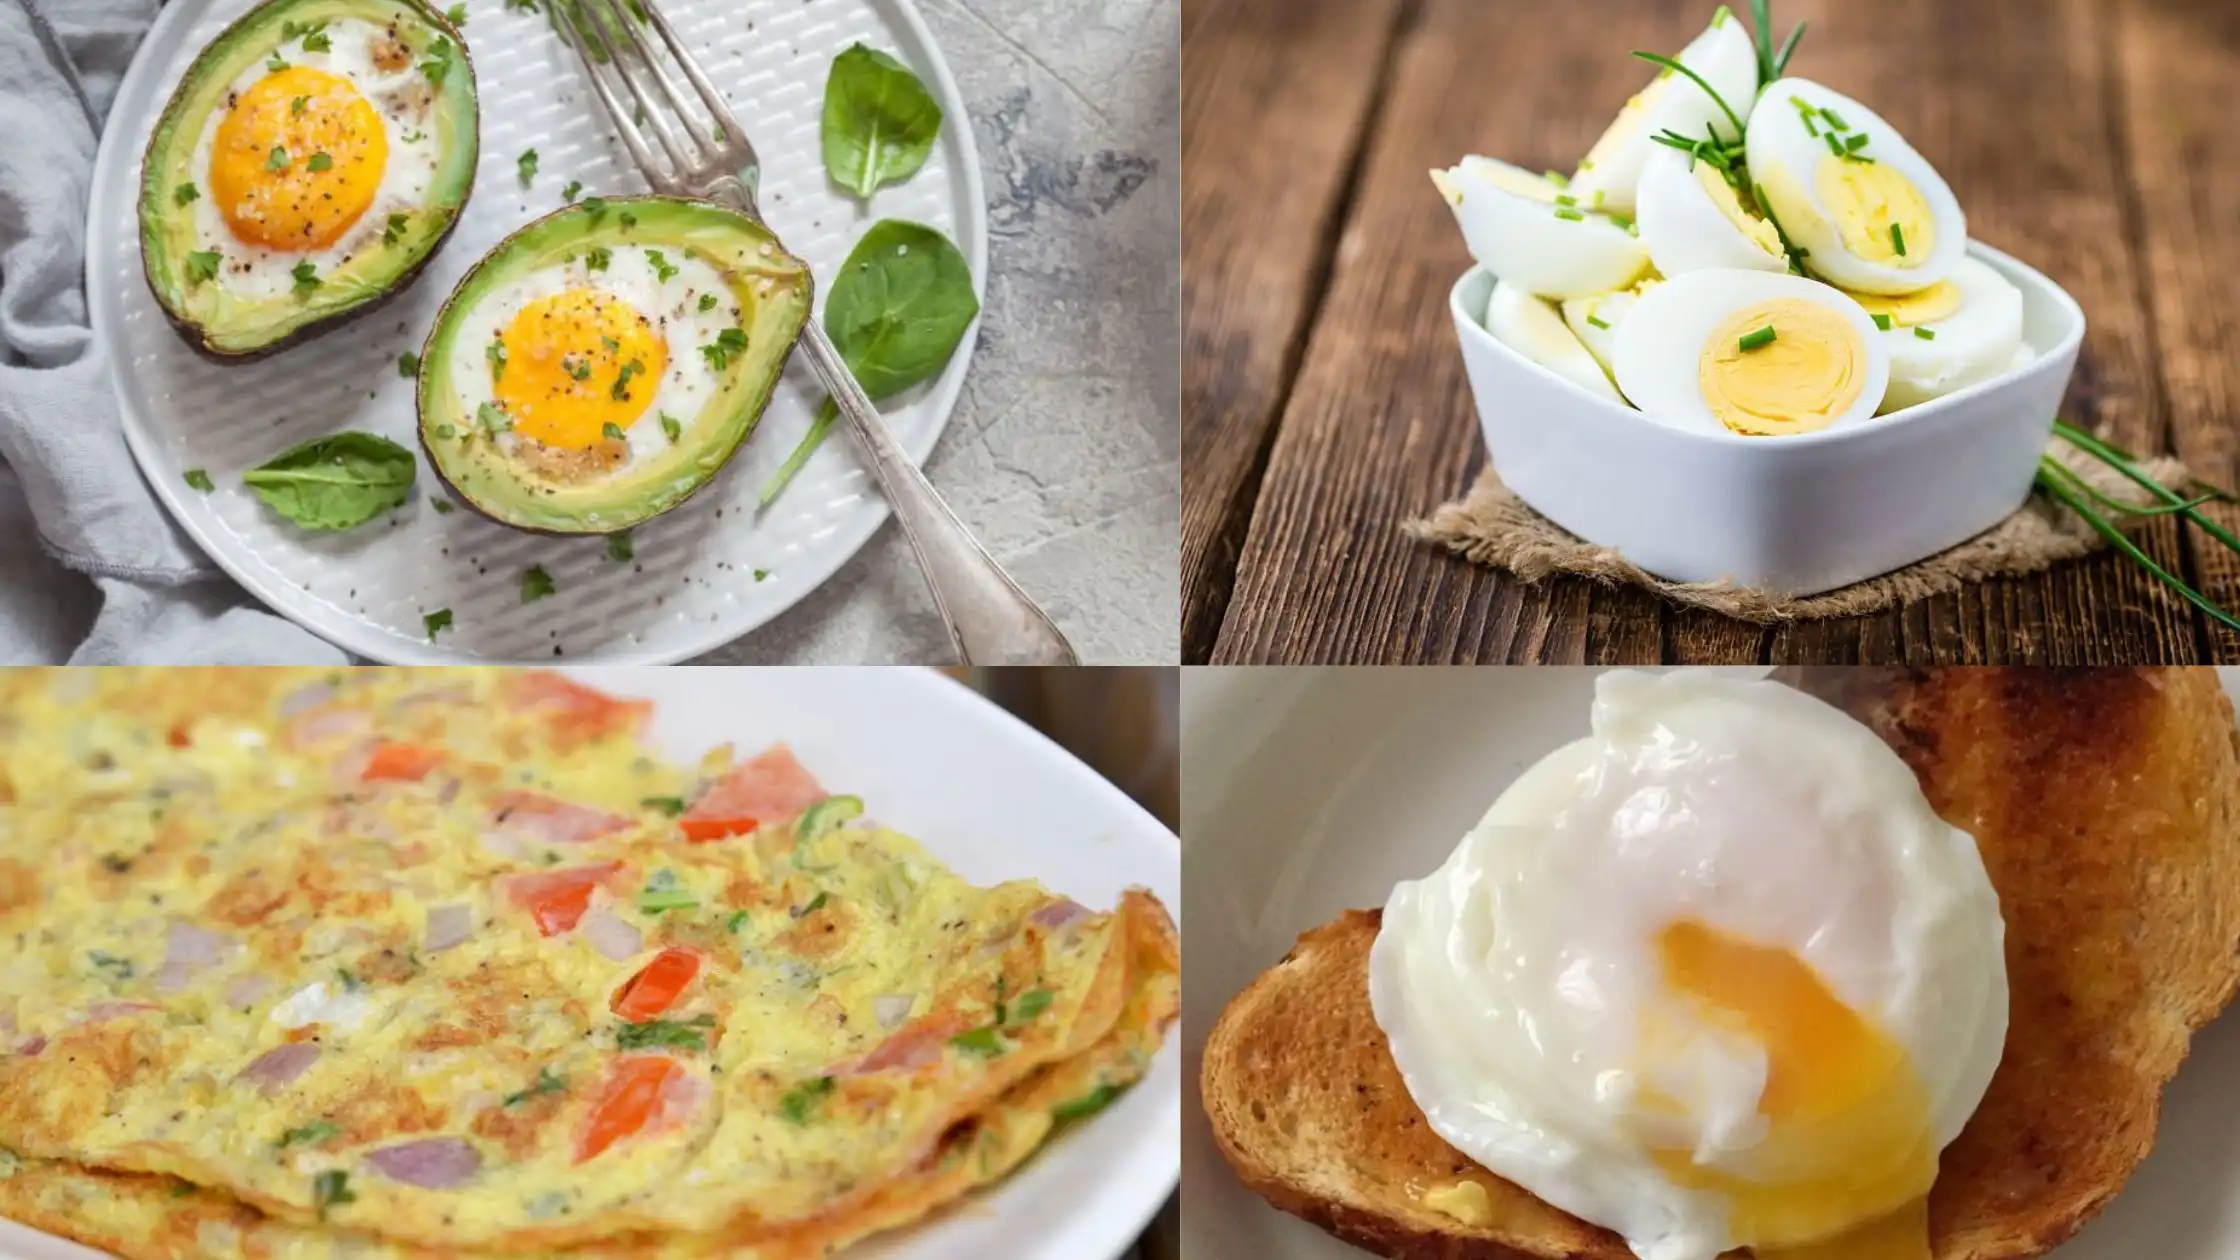 Healthy Way Of Eating Eggs For Weight Loss